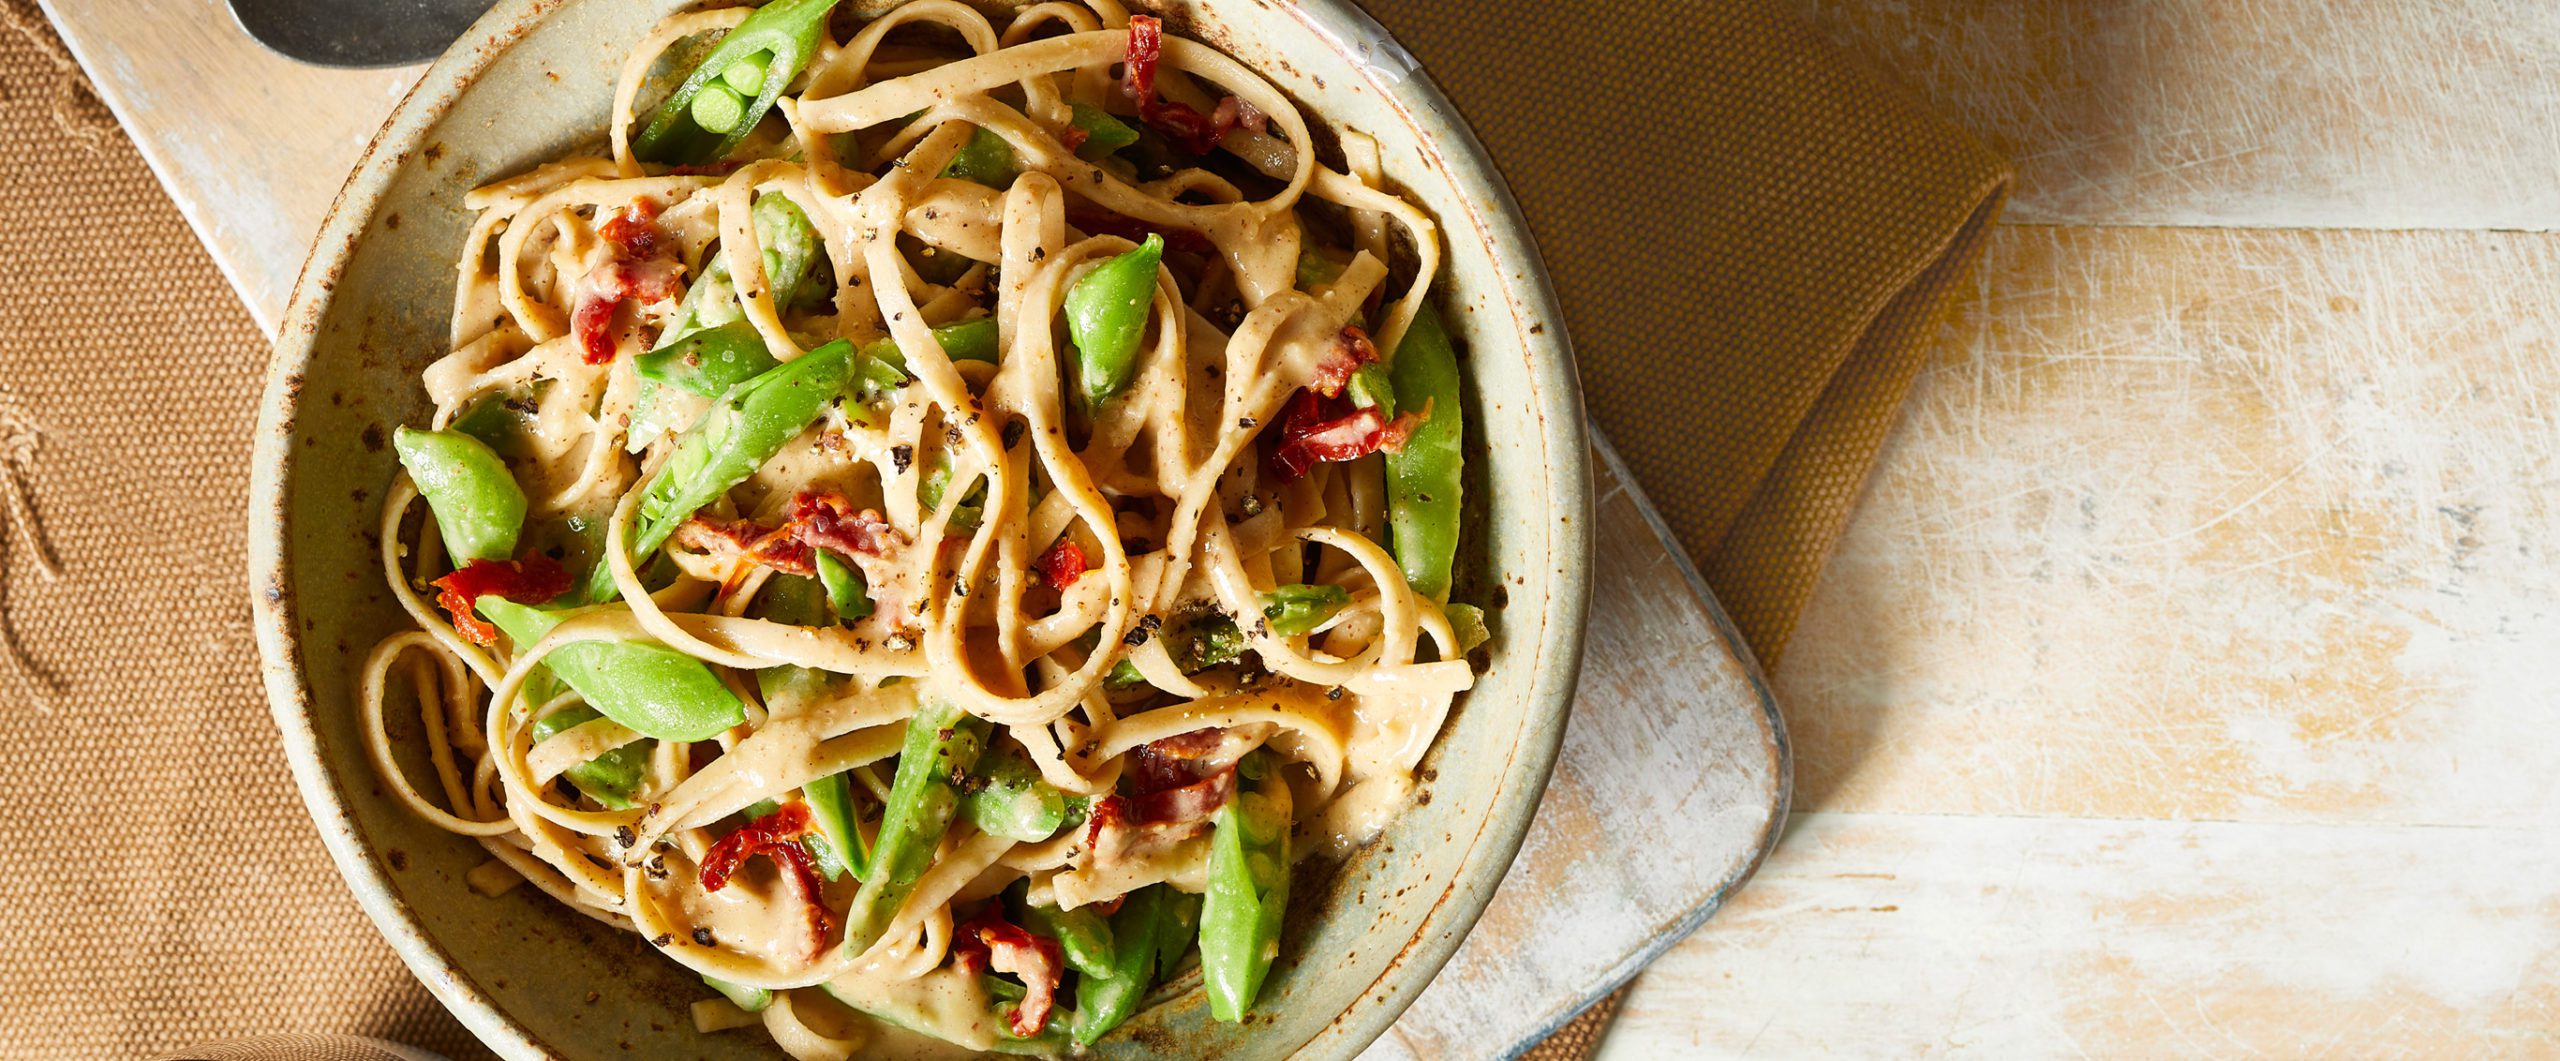 Vegan White Bean Fettuccine Alfredo with Peas and Sun-Dried Tomatoes